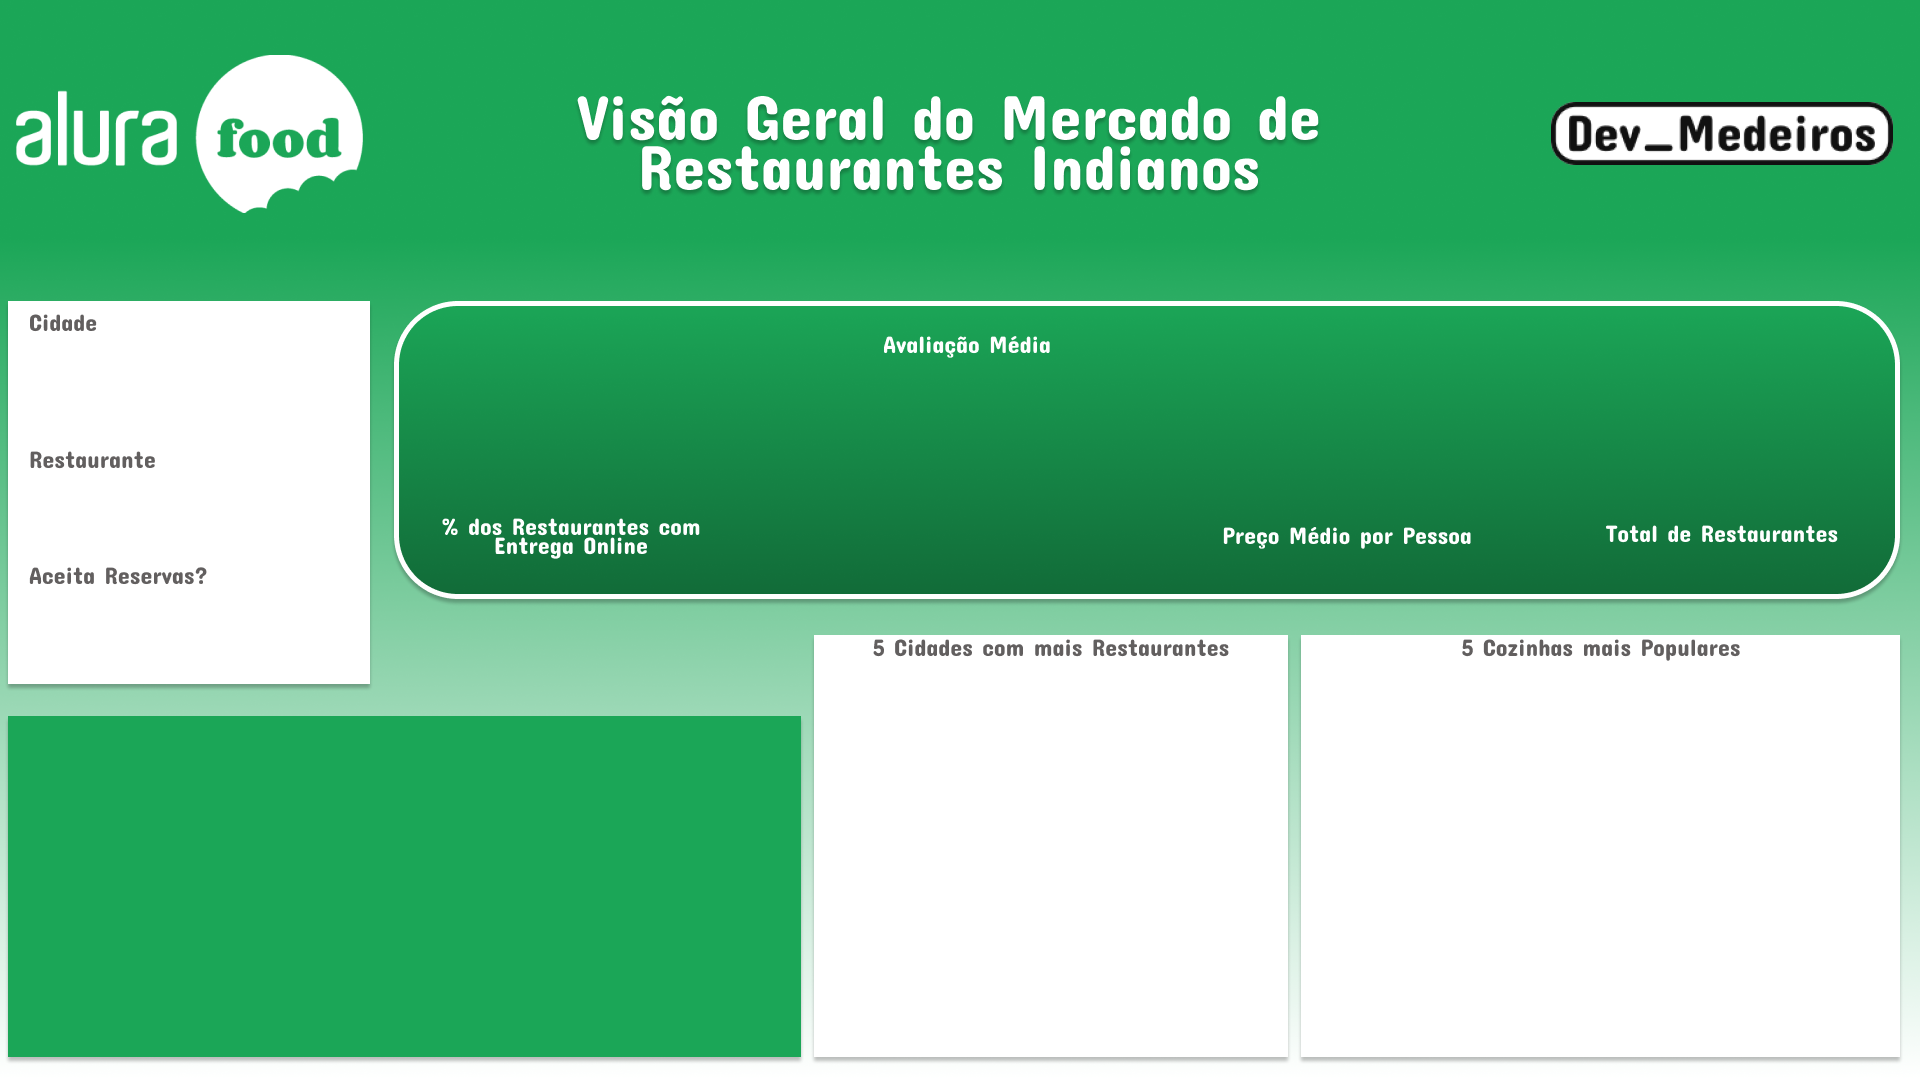  In the image you can read the text: Overview of Indian Restaurants Market Dev_Medeiros City Restaurant Accepts Reservations? % of Restaurants with Online Delivery Average Rating Average Price per Person Total Restaurants 5 Cities with the most Restaurants 5 Most Popular Cuisine